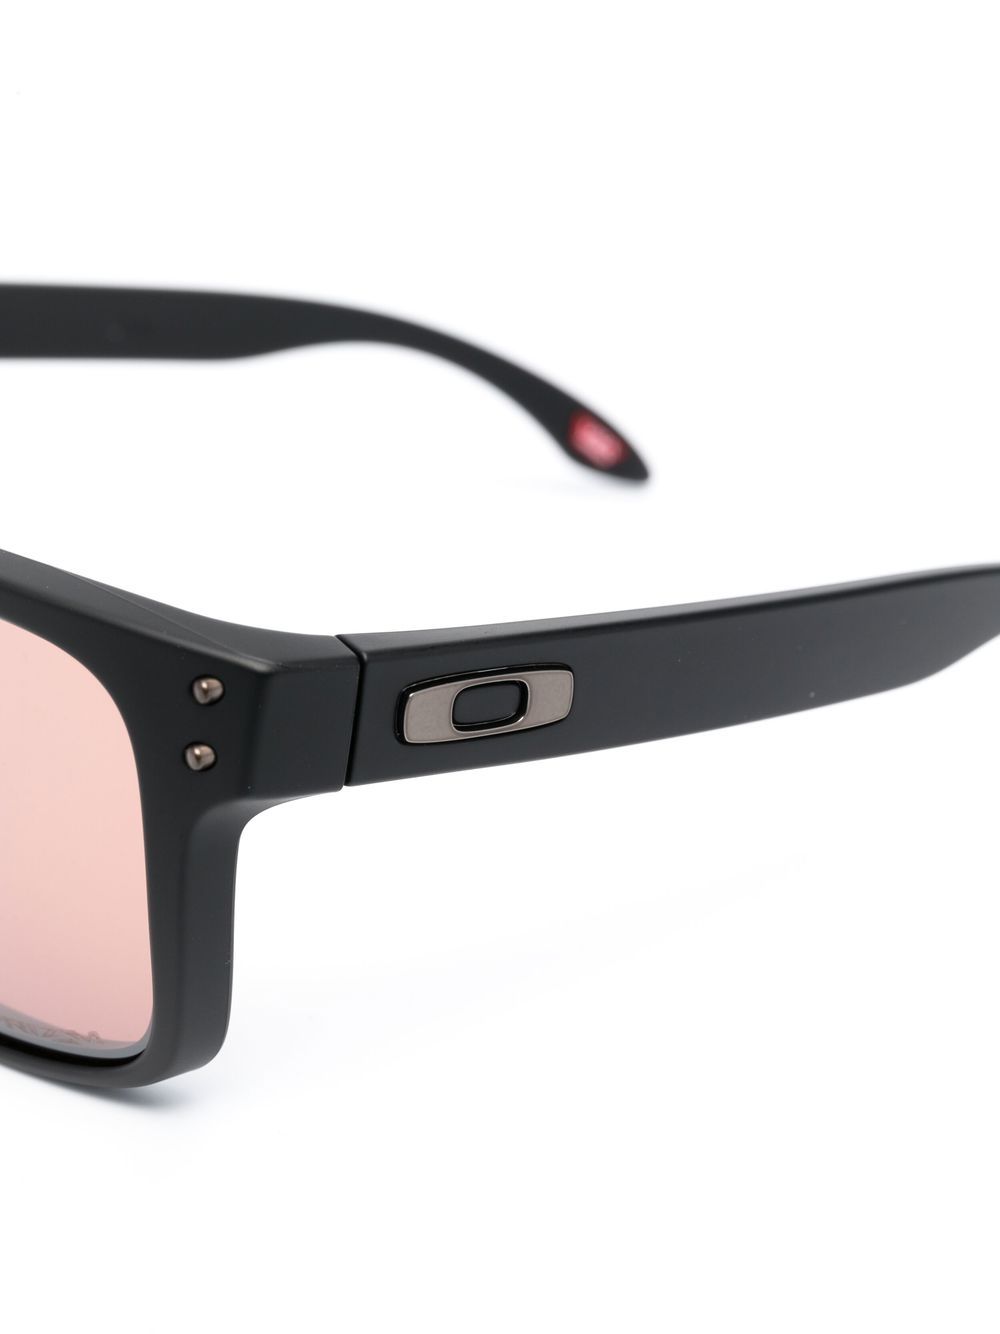 Pink tinted square frame sunglasses